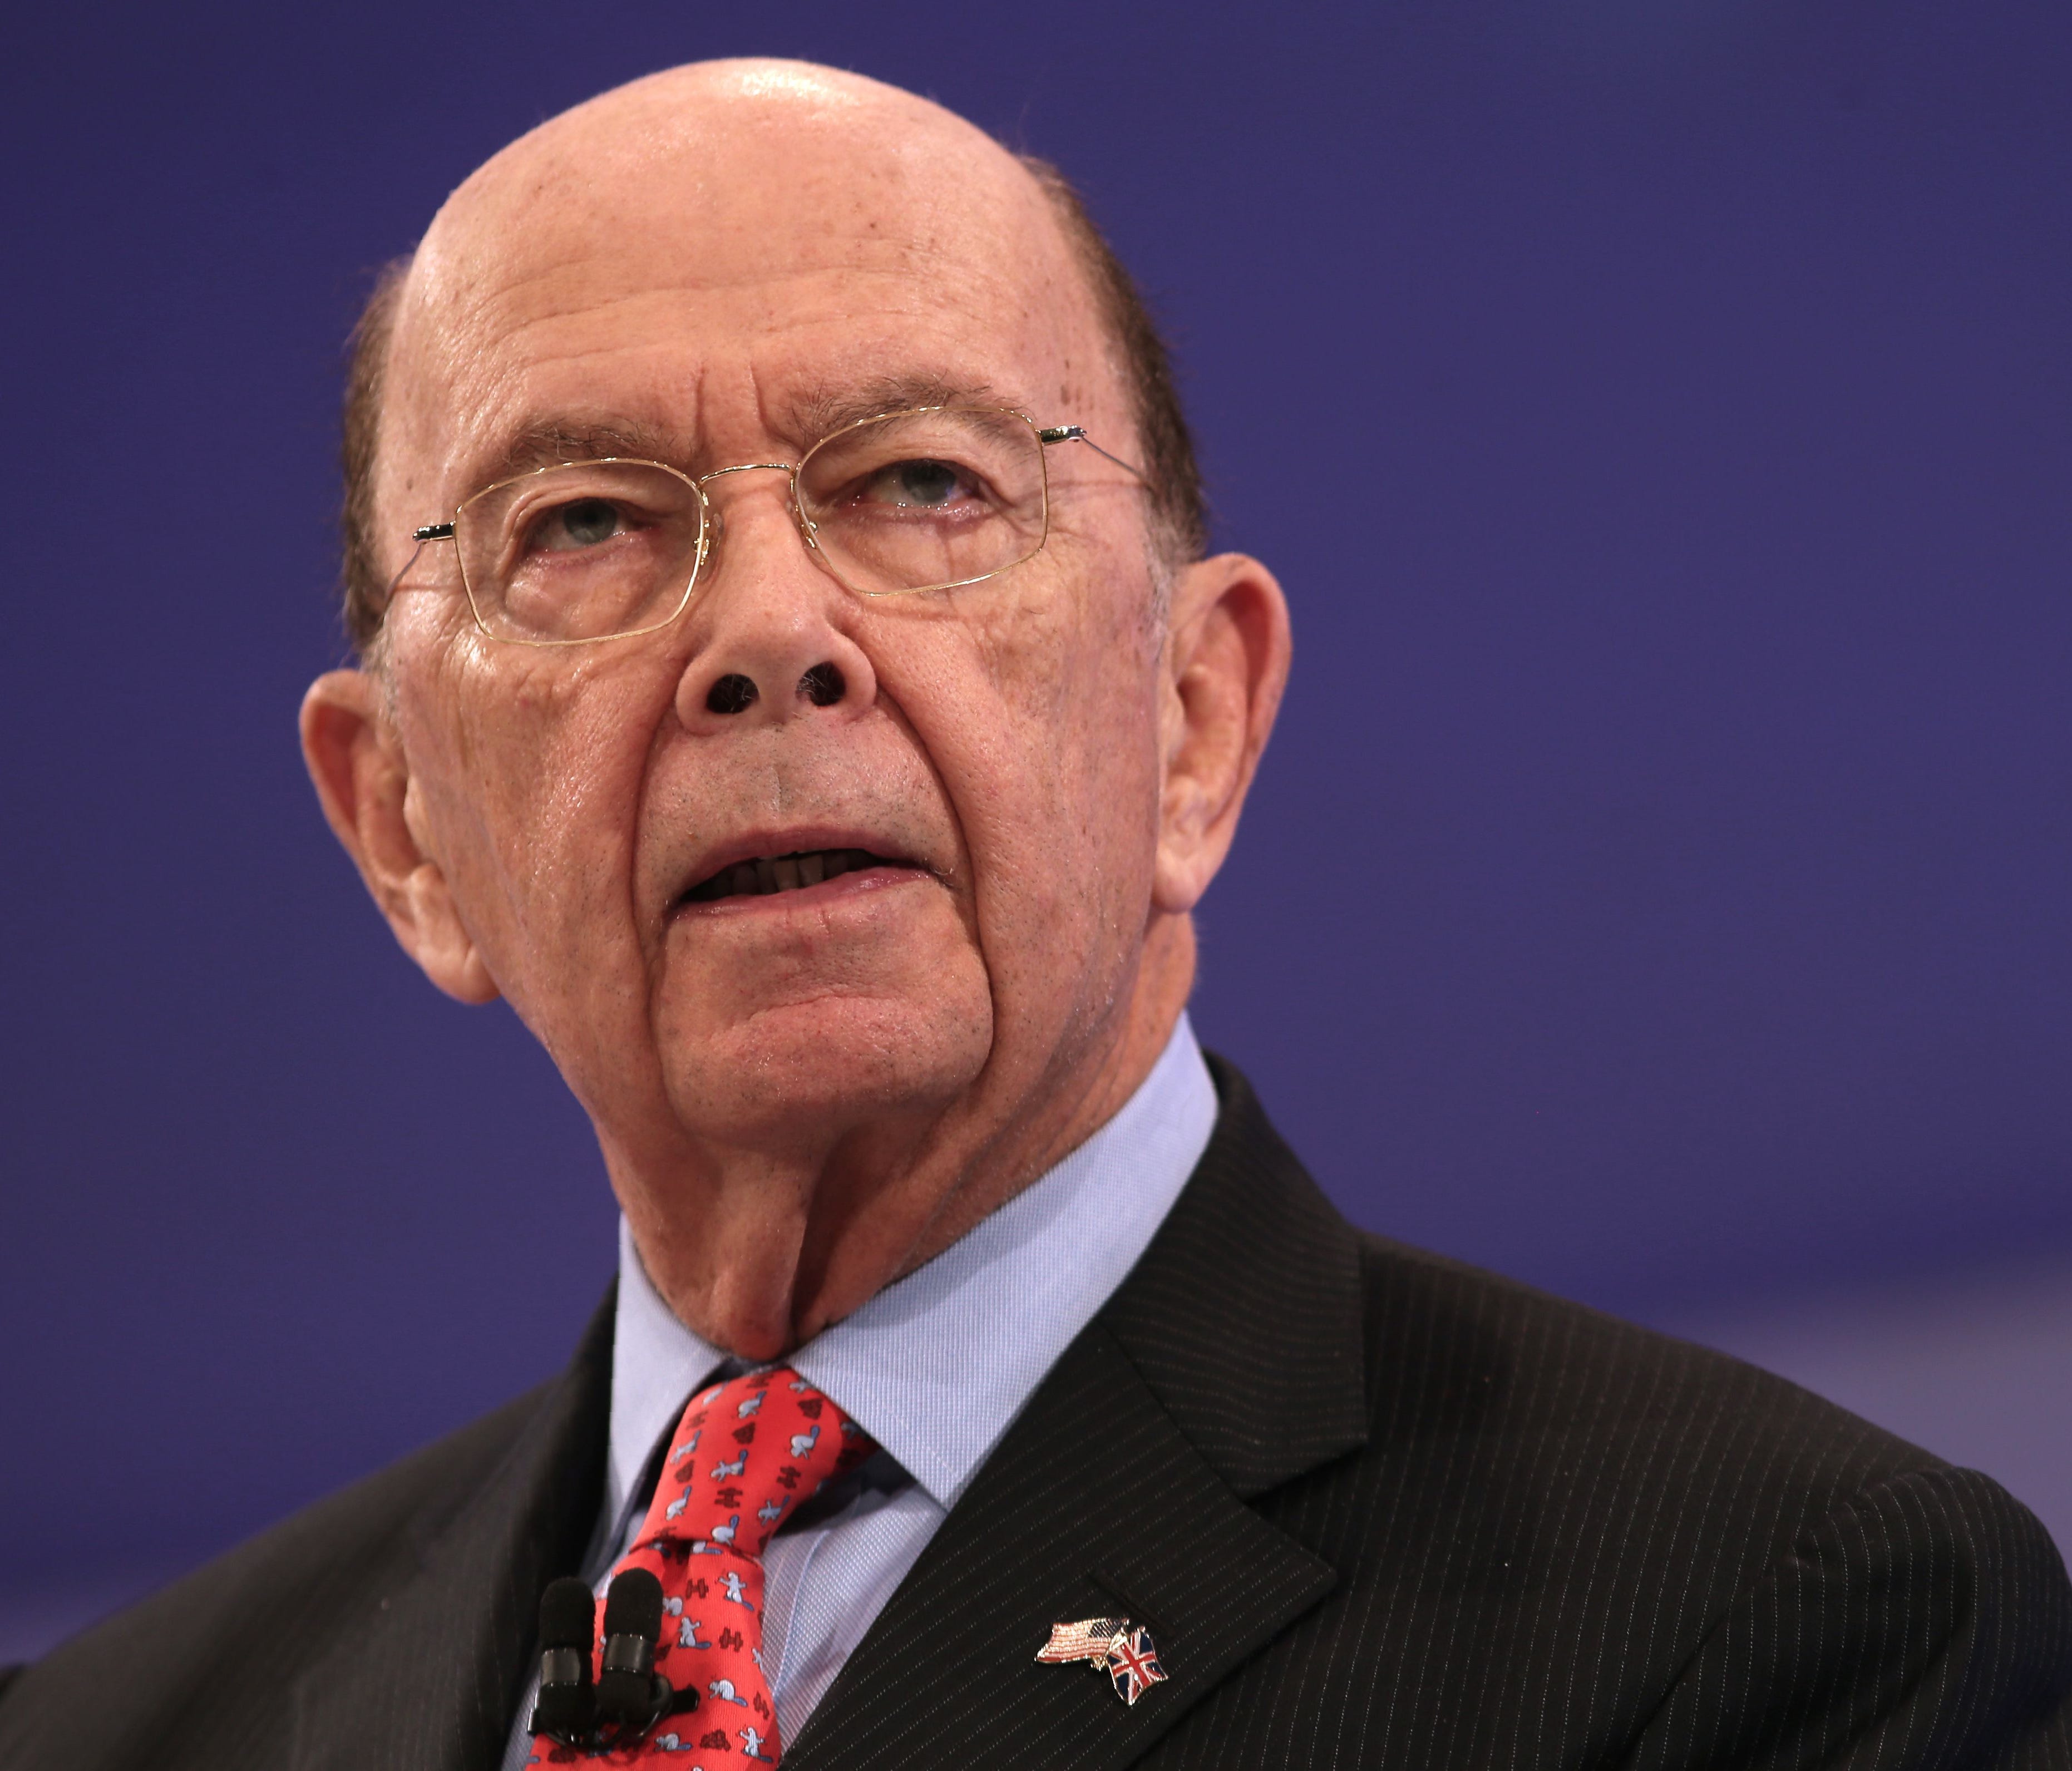 U.S. Secretary of Commerce, Wilbur Ross addresses delegates at the annual Confederation of British Industry (CBI) conference in east London, on Nov. 6, 2017.